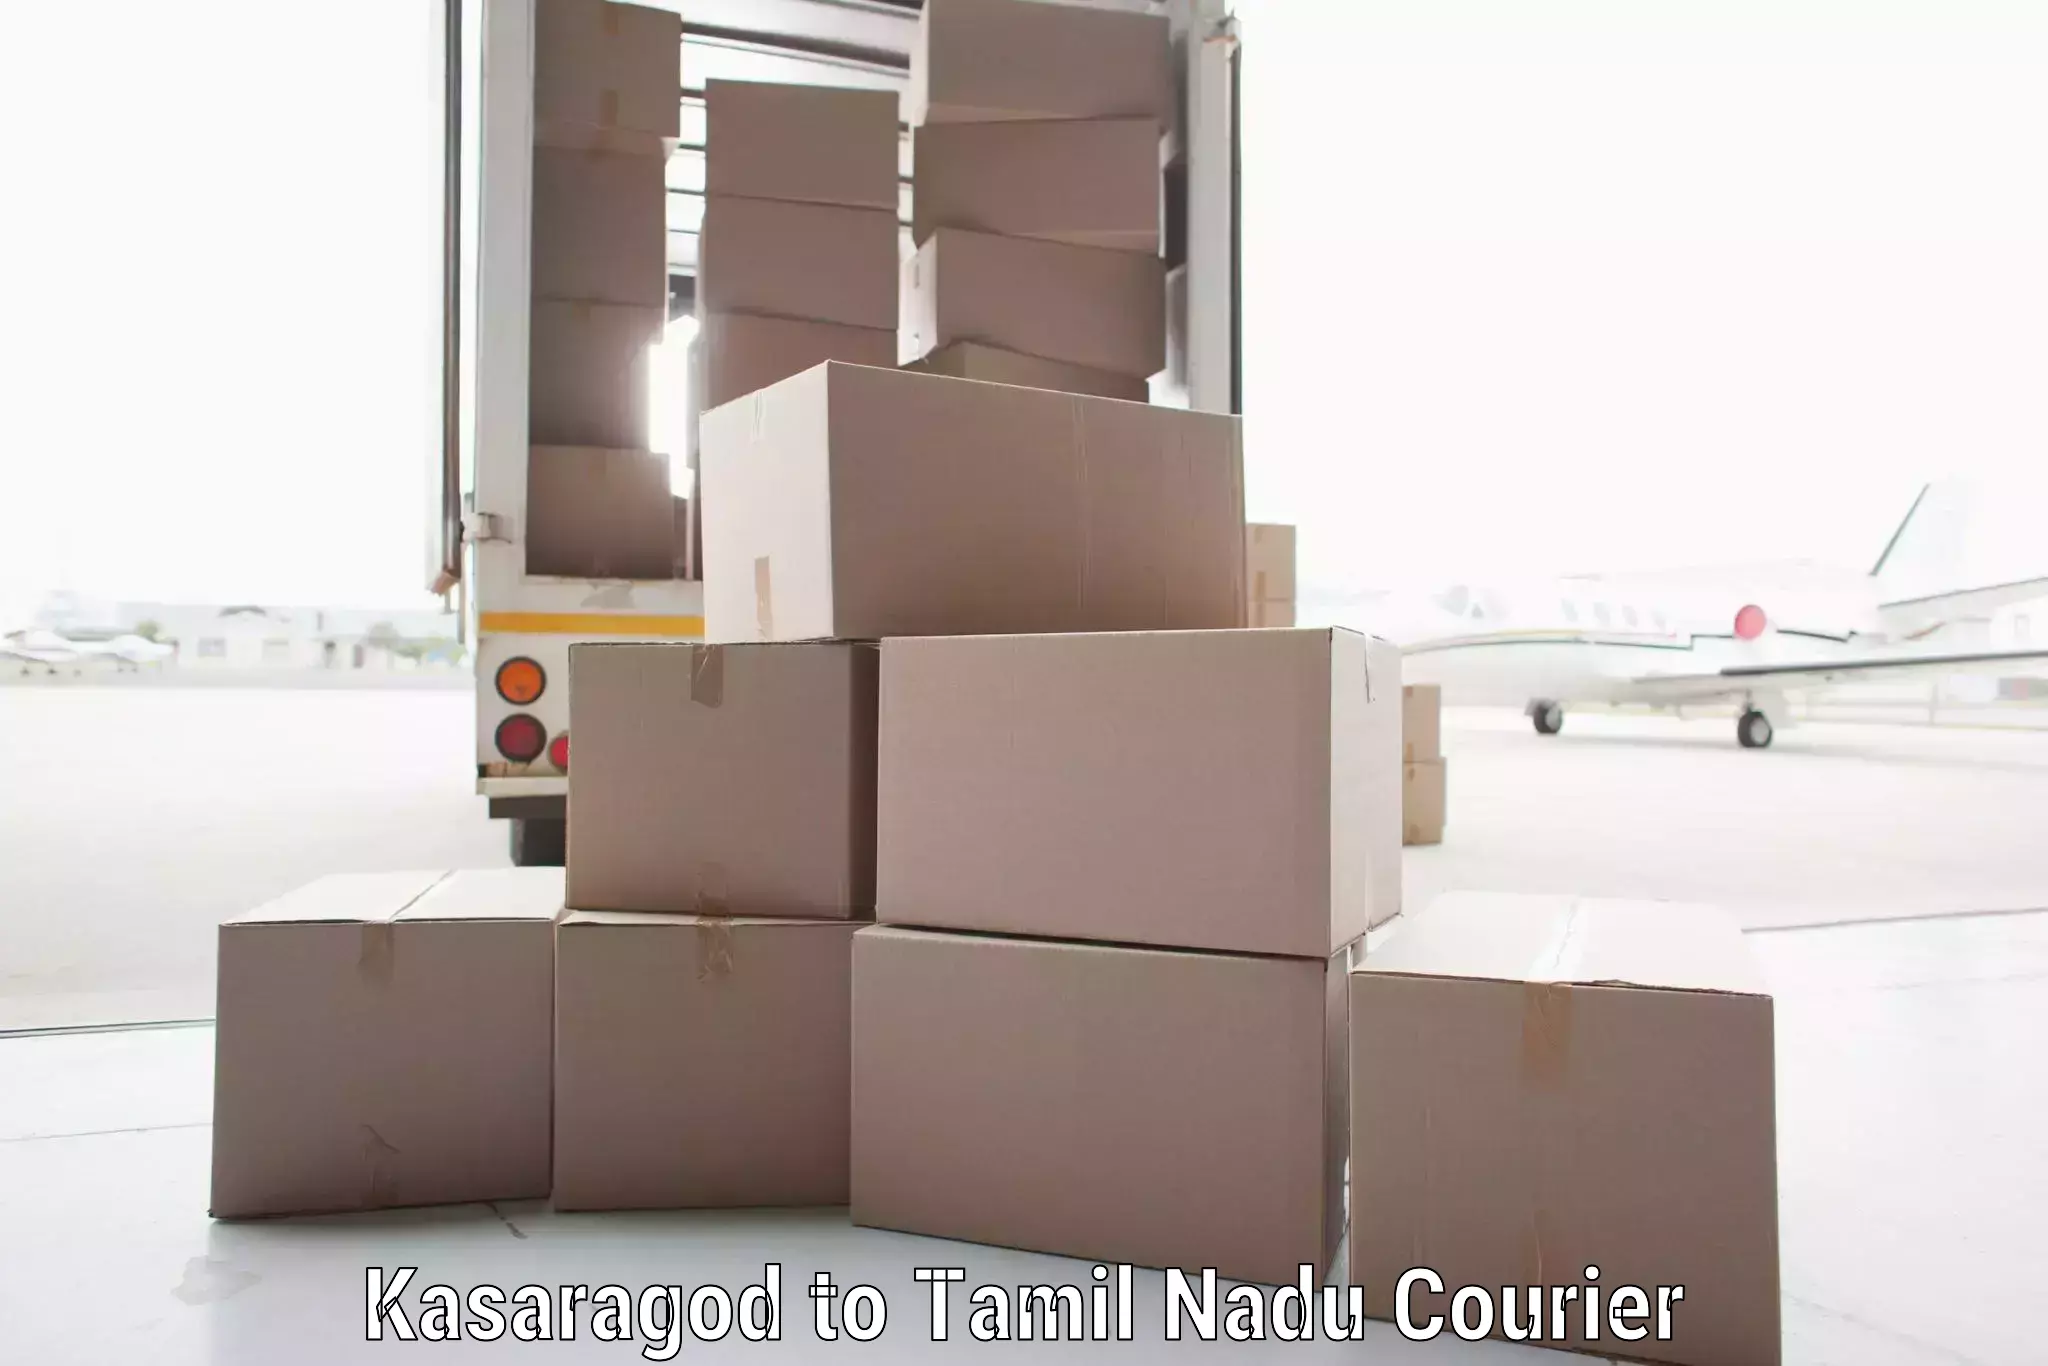 Full-service courier options Kasaragod to Palani